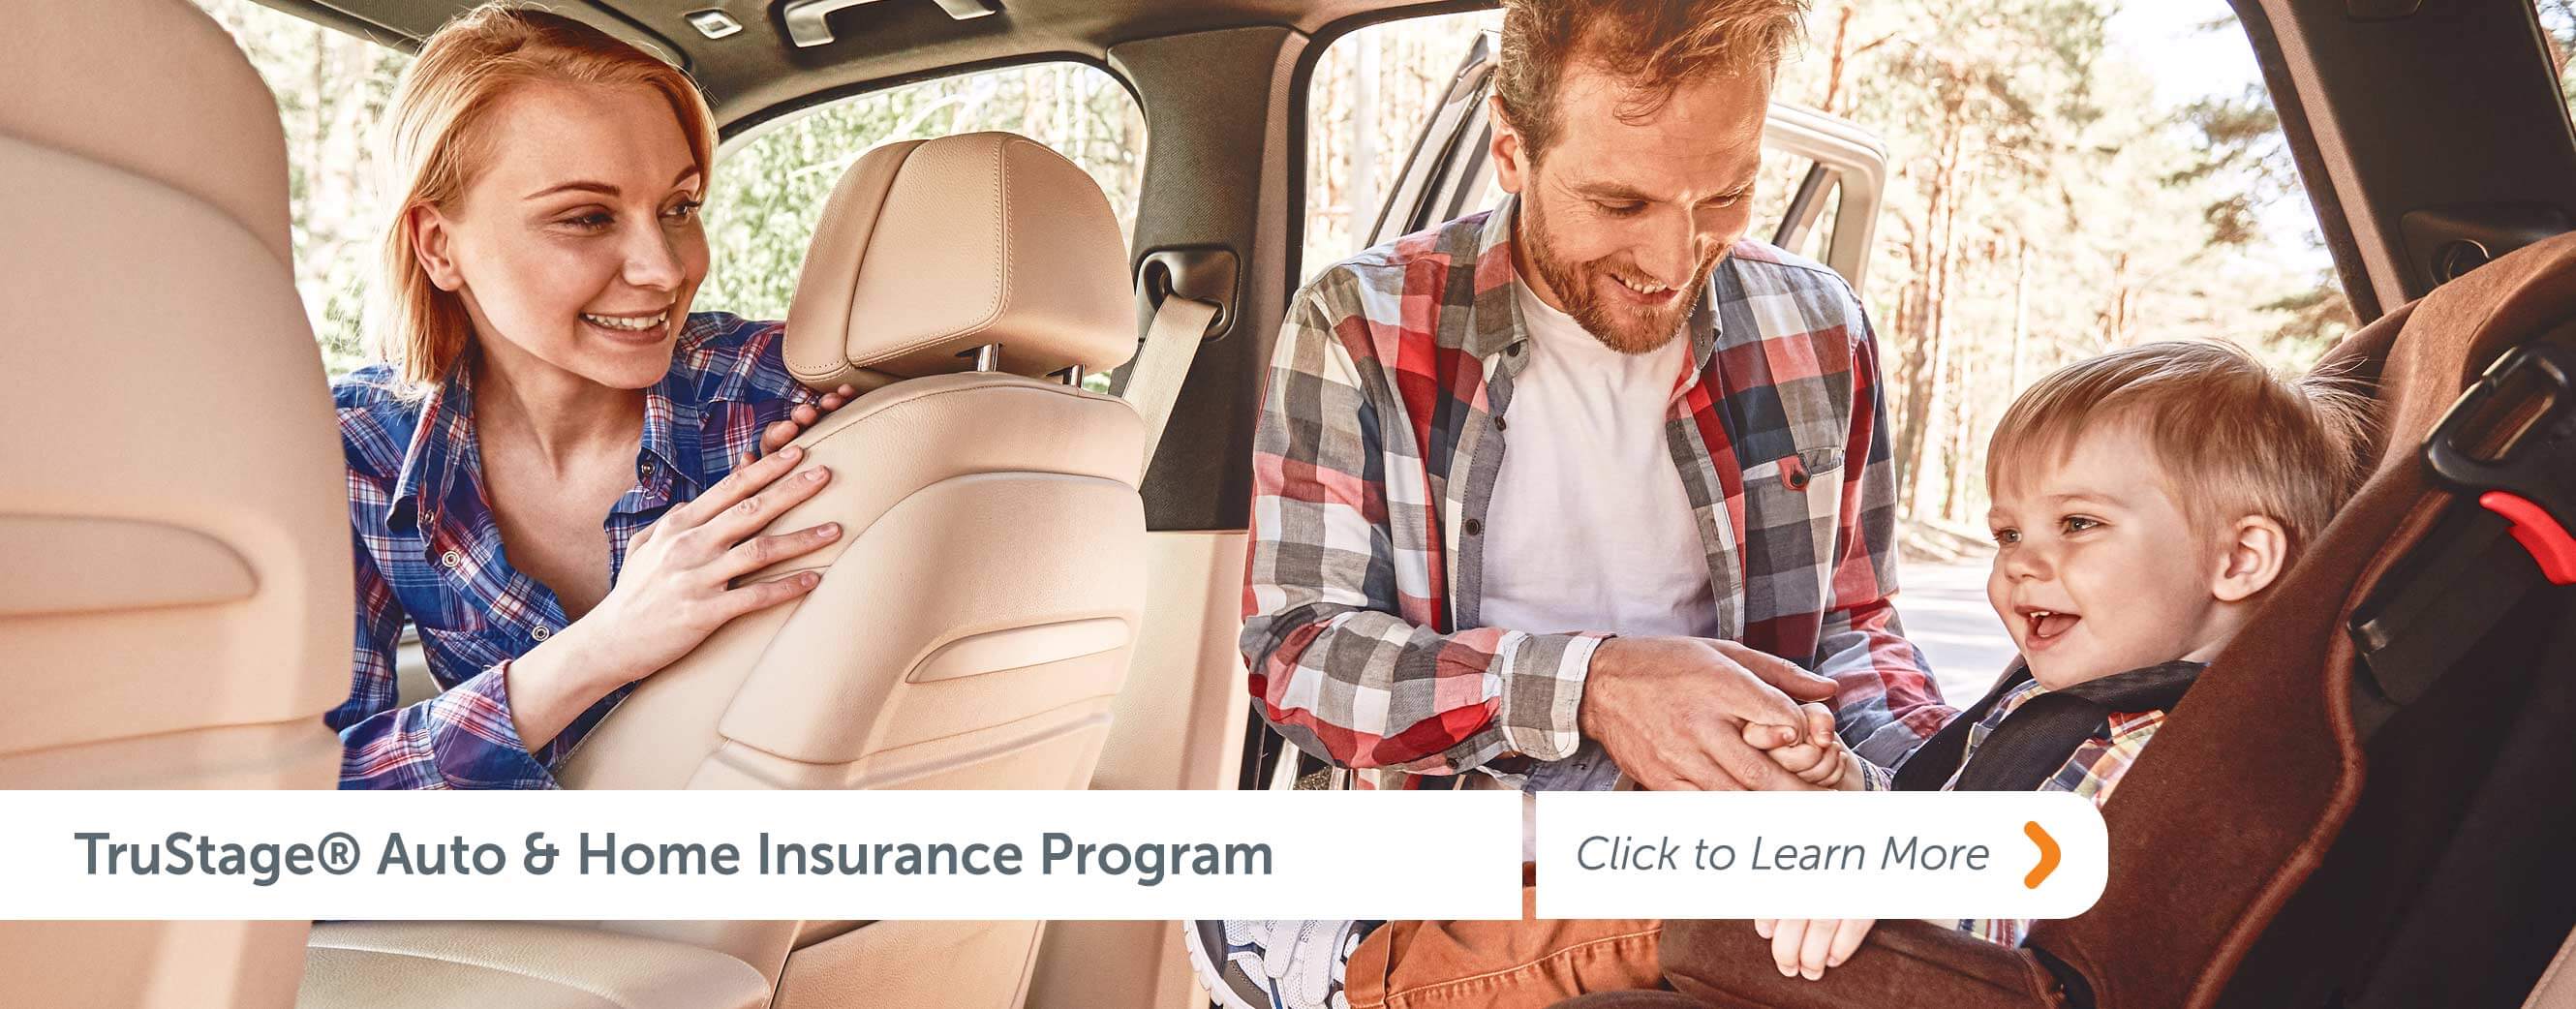 TruStage Auto and Home Insurance Program. Click to learn more!